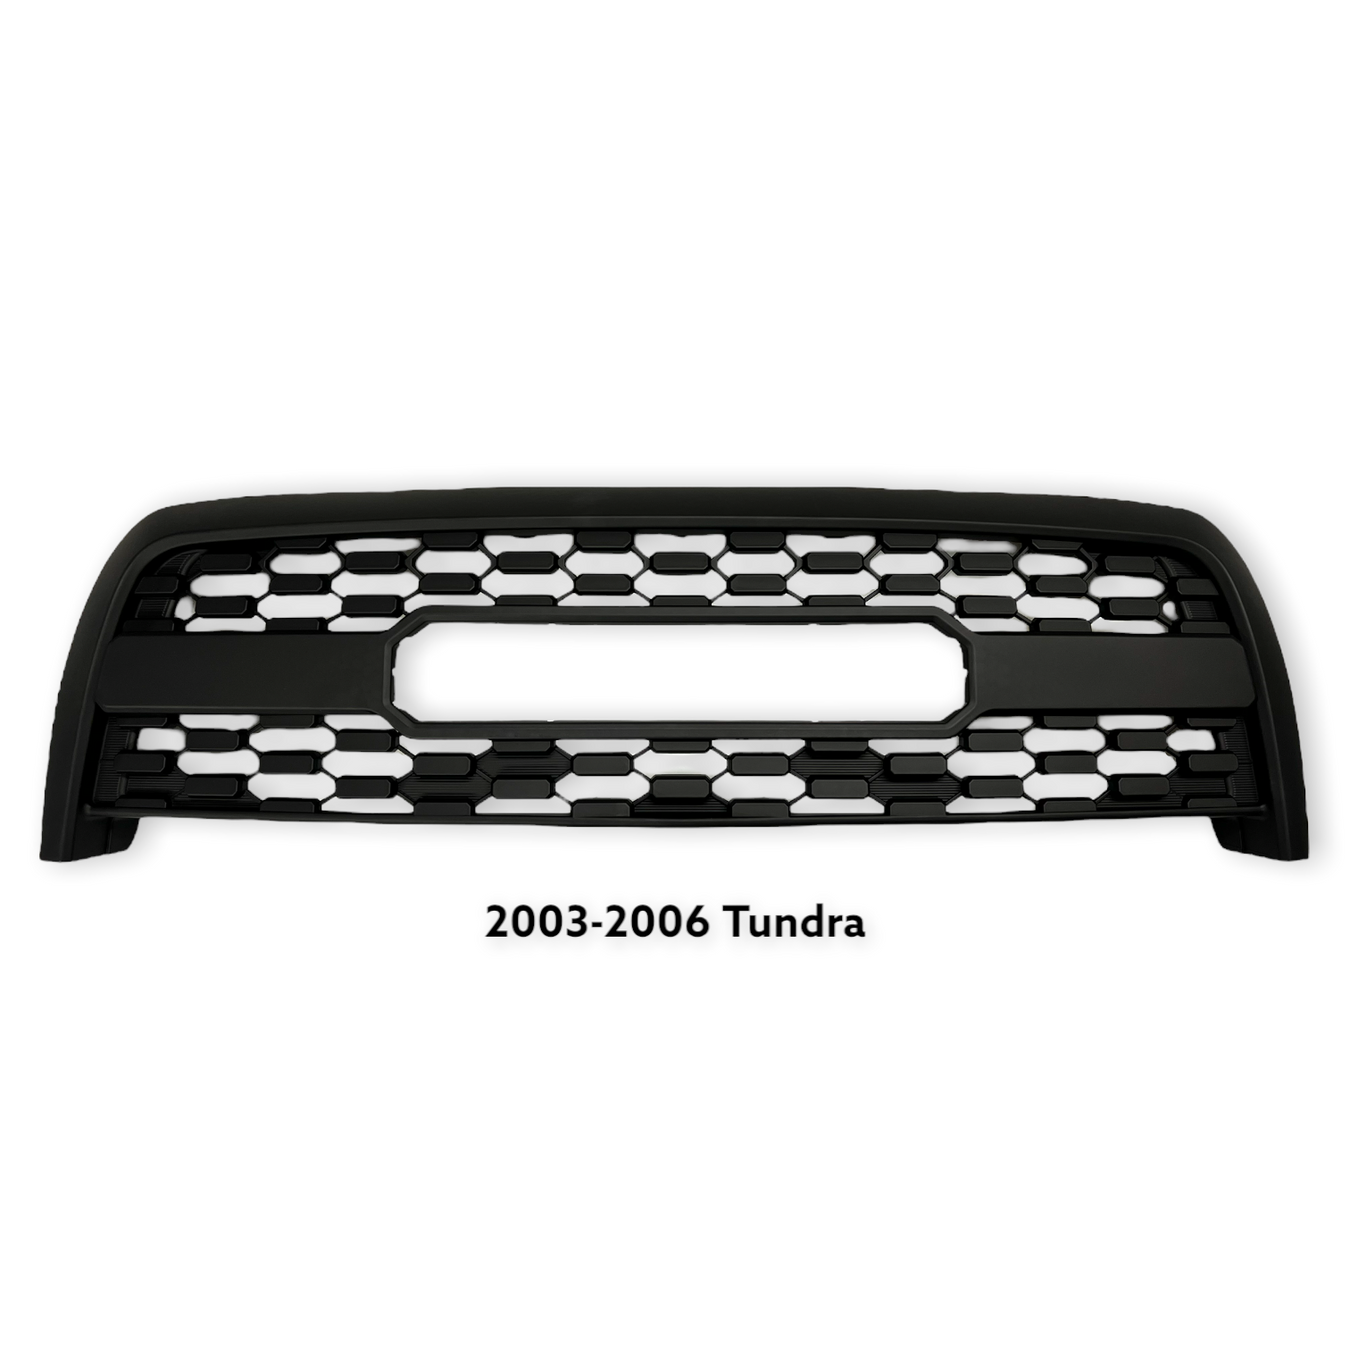 2003-2006 Tundra - Grilles